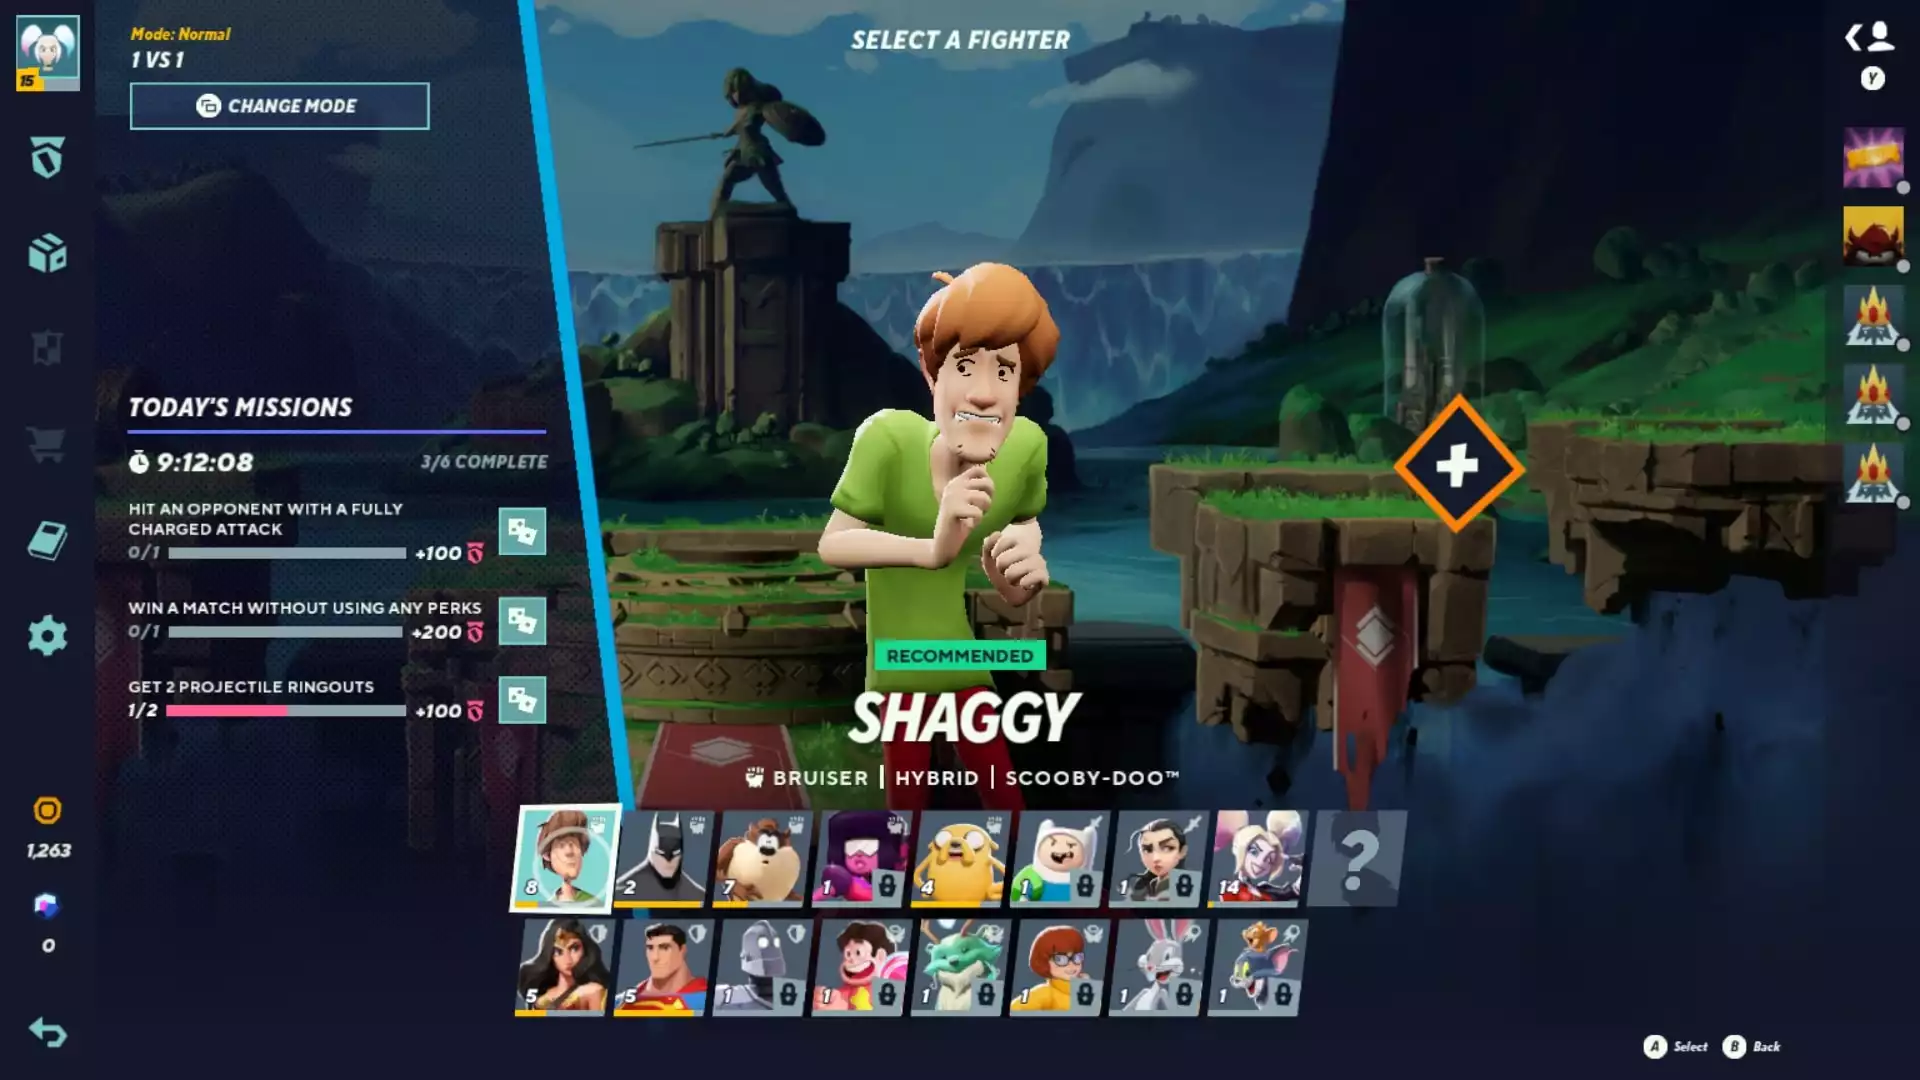 MultiVersus Shaggy Guide: Combos, Perks, Specials, And More